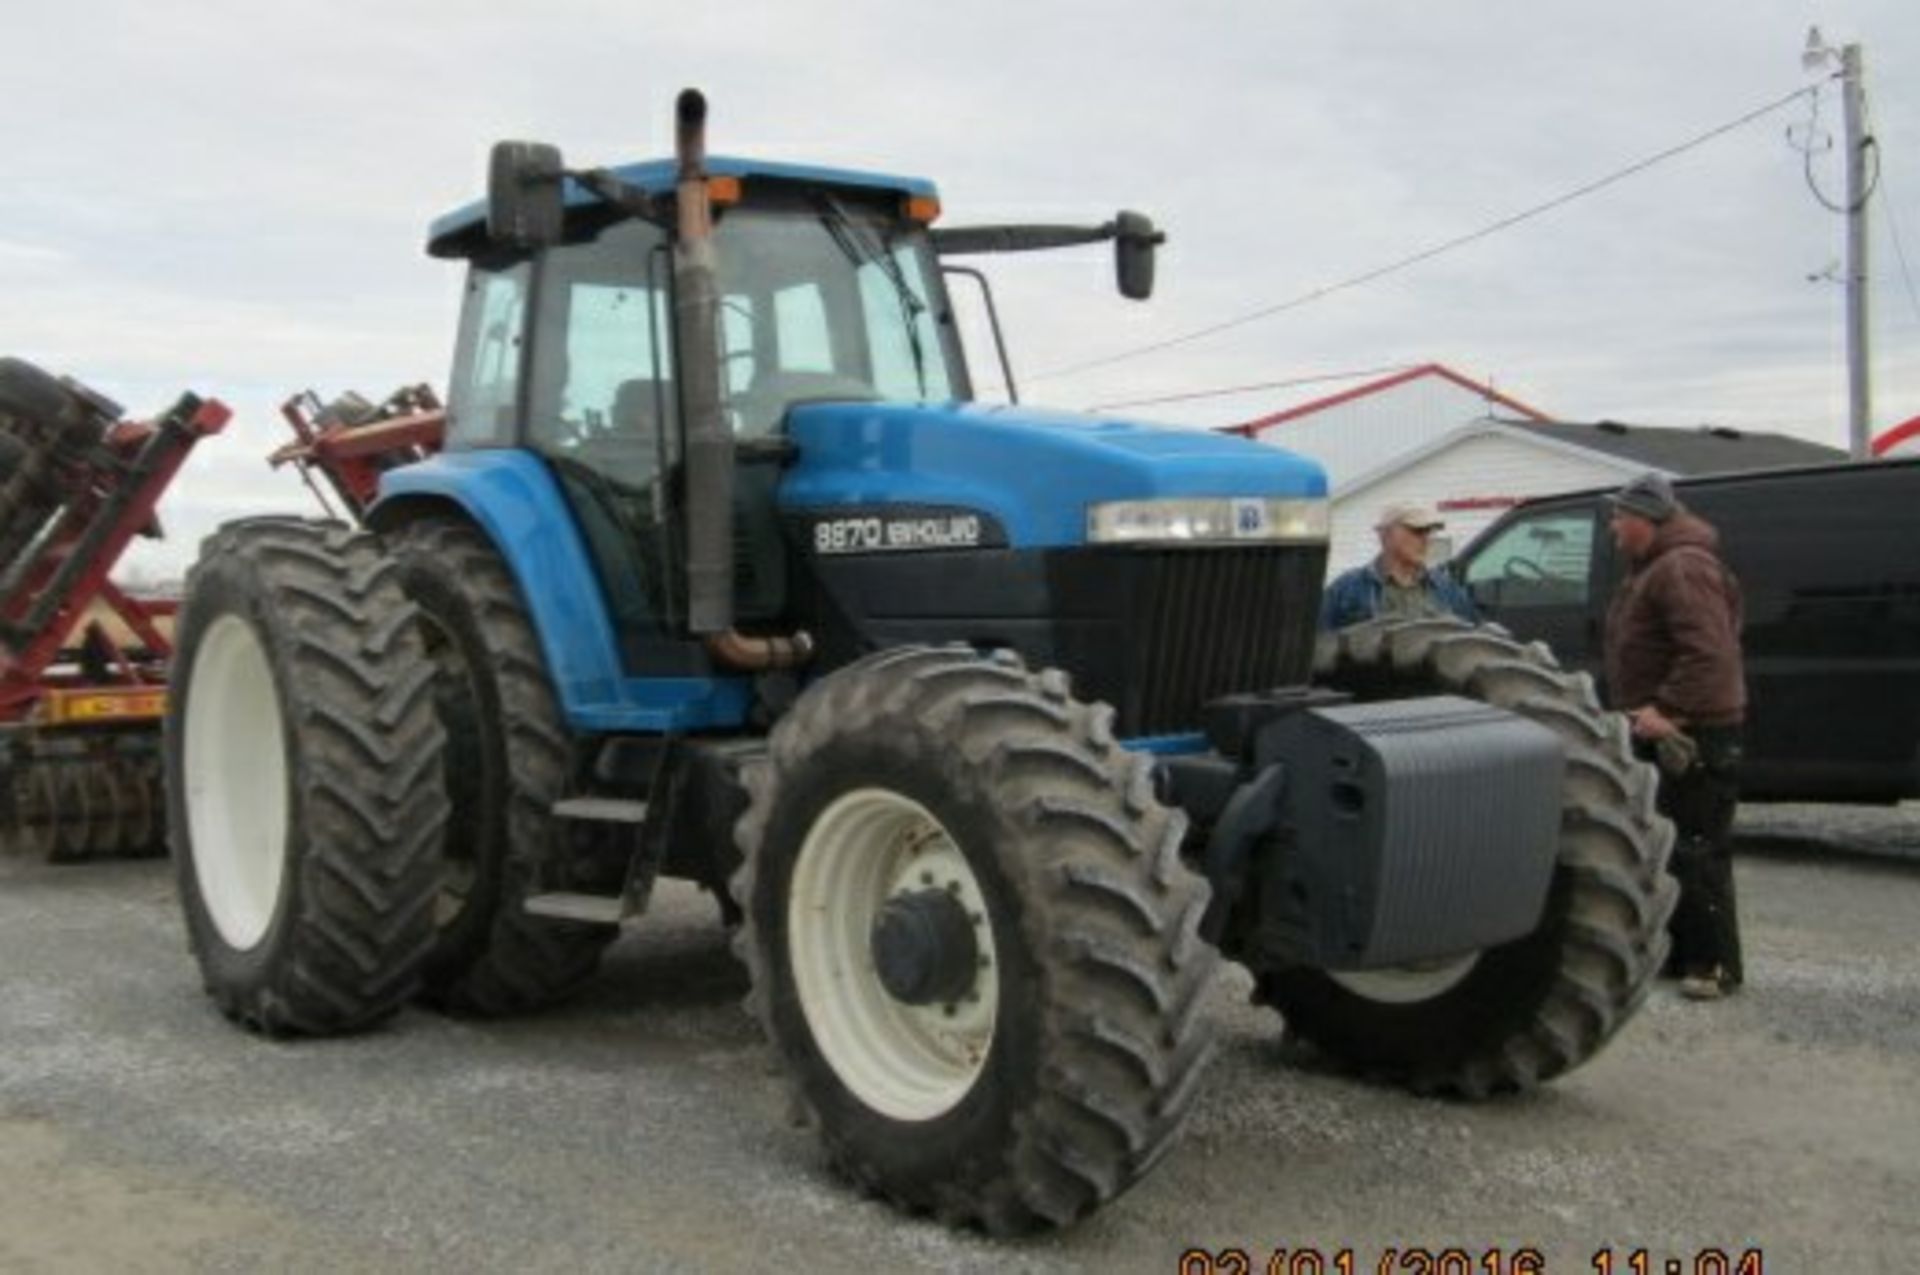 (Lot 109a) 2000 New Holland 8870 diesel tractor 3,810 hrs, serial D420599, w/duals Continental 460-